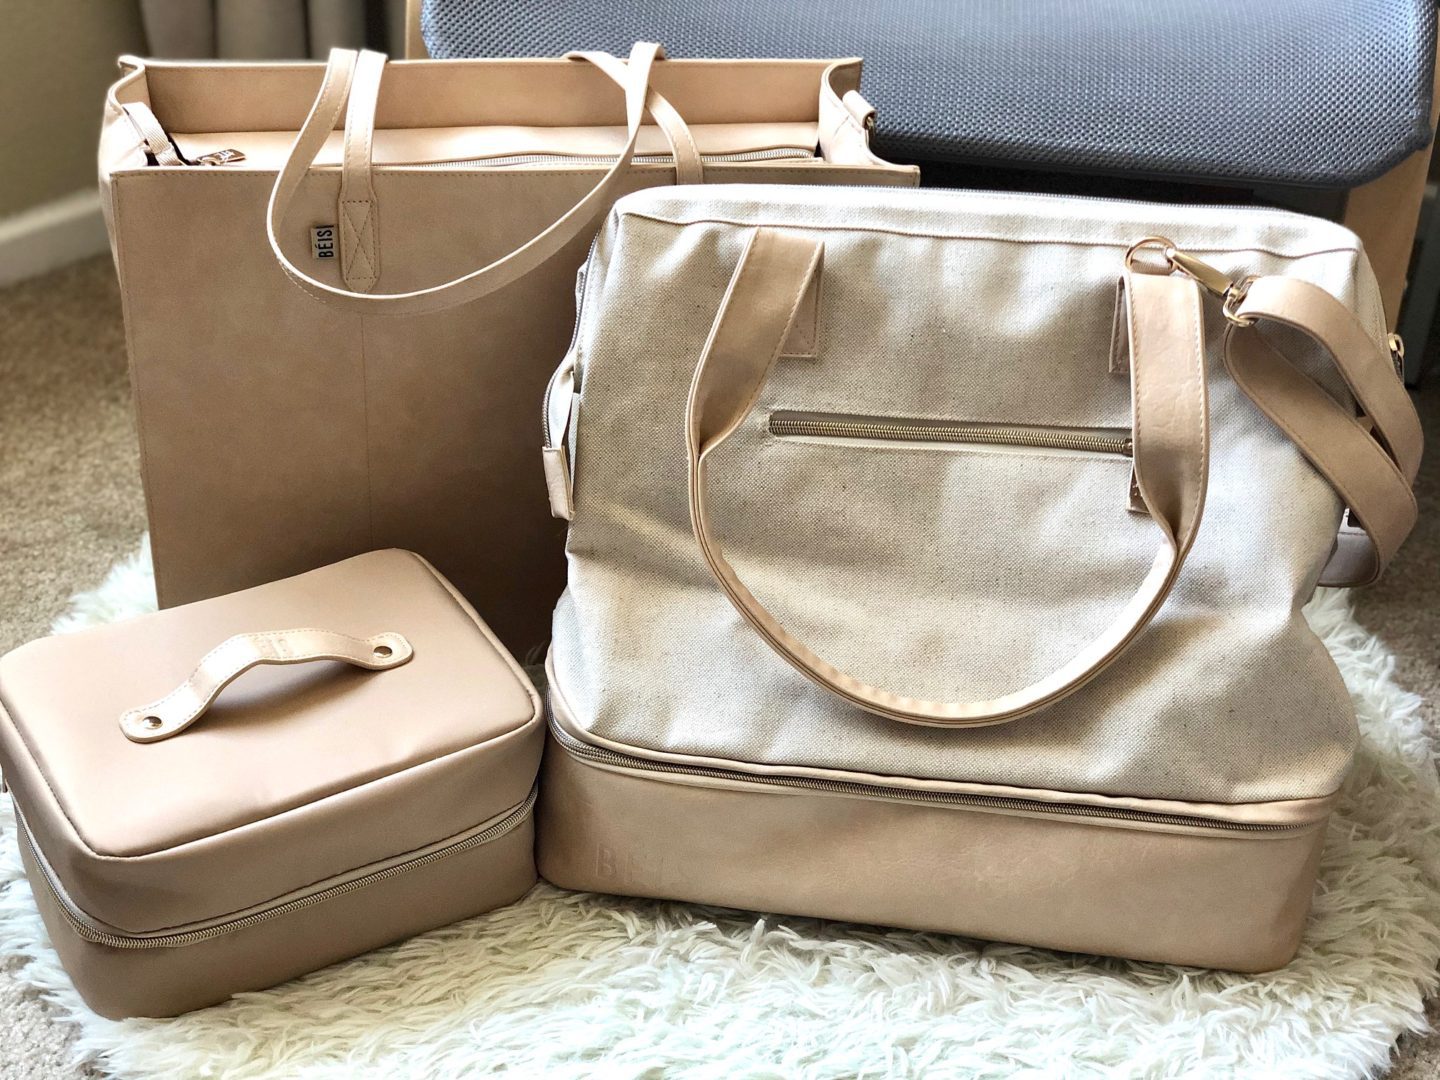 Beis Travel Review of Weekender Mini, Work Tote and Hanging Cosmetics Case